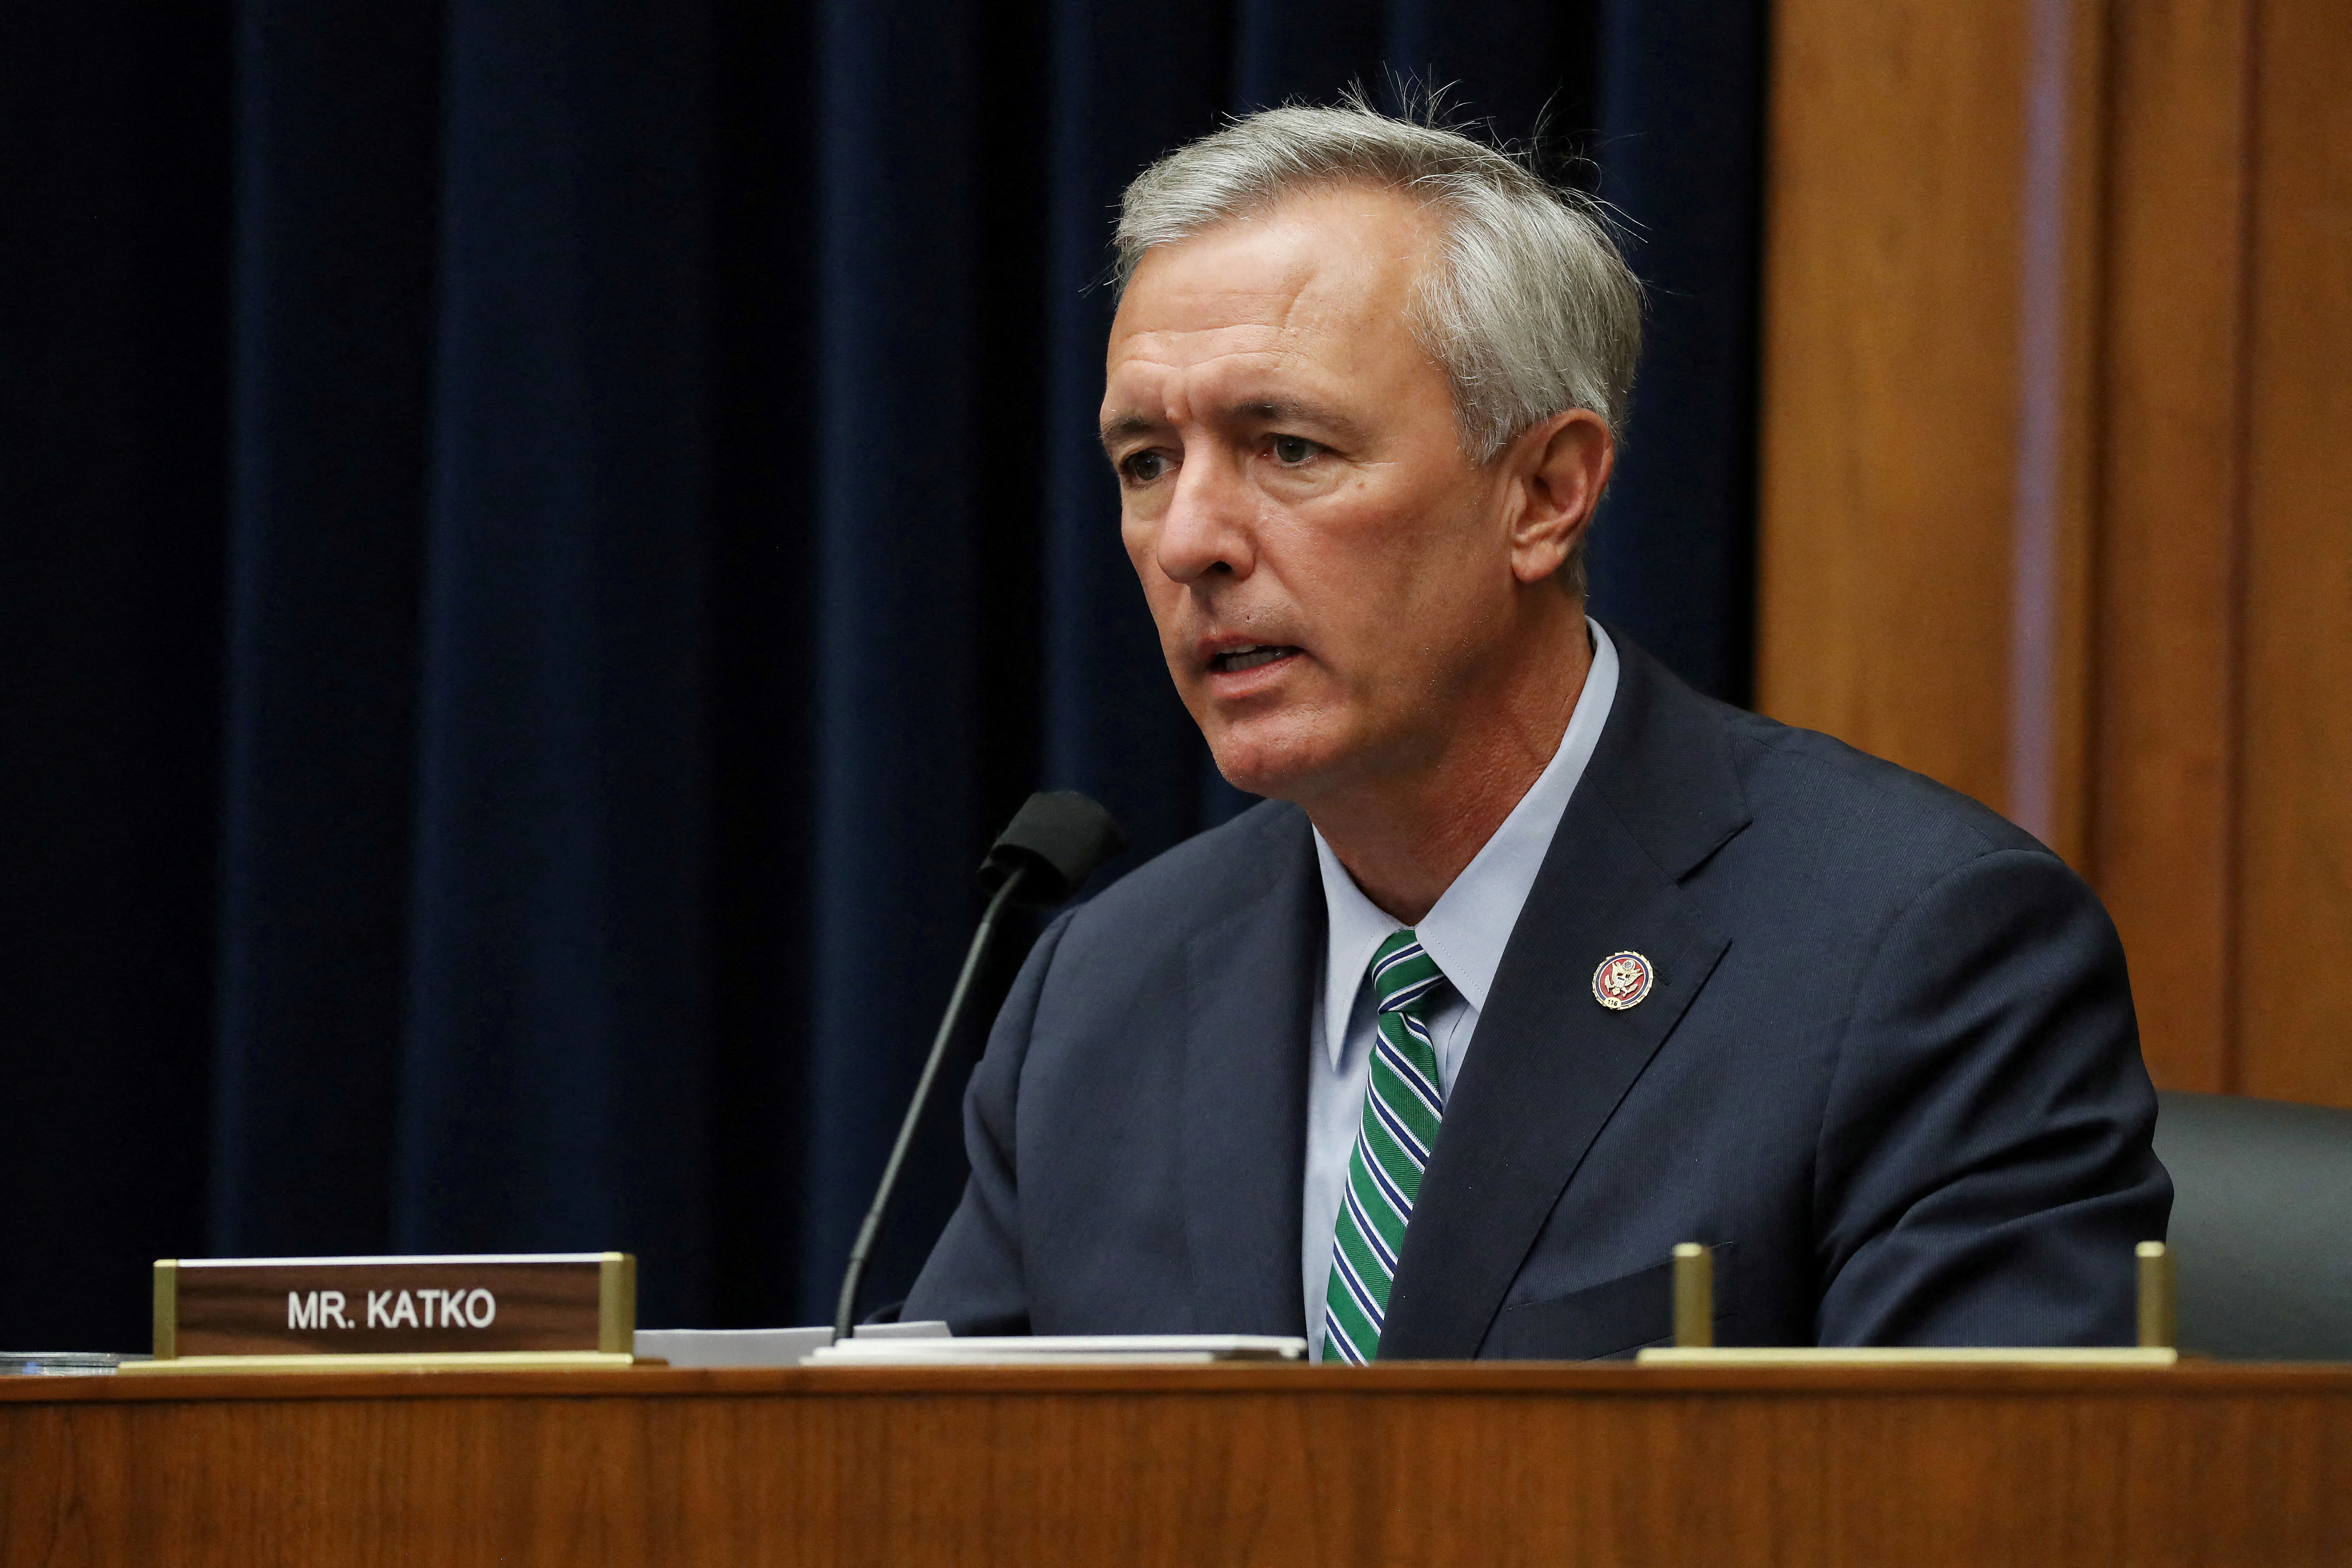 House Homeland Security Committee member Rep. John Katko (R-NY) questions witnesses during a House Homeland Security Committee hearing about 'worldwide threats to the homeland' on Capitol Hill in Washington, U.S., September 17, 2020. Chip Somodevilla/Pool via REUTERS/File Photo